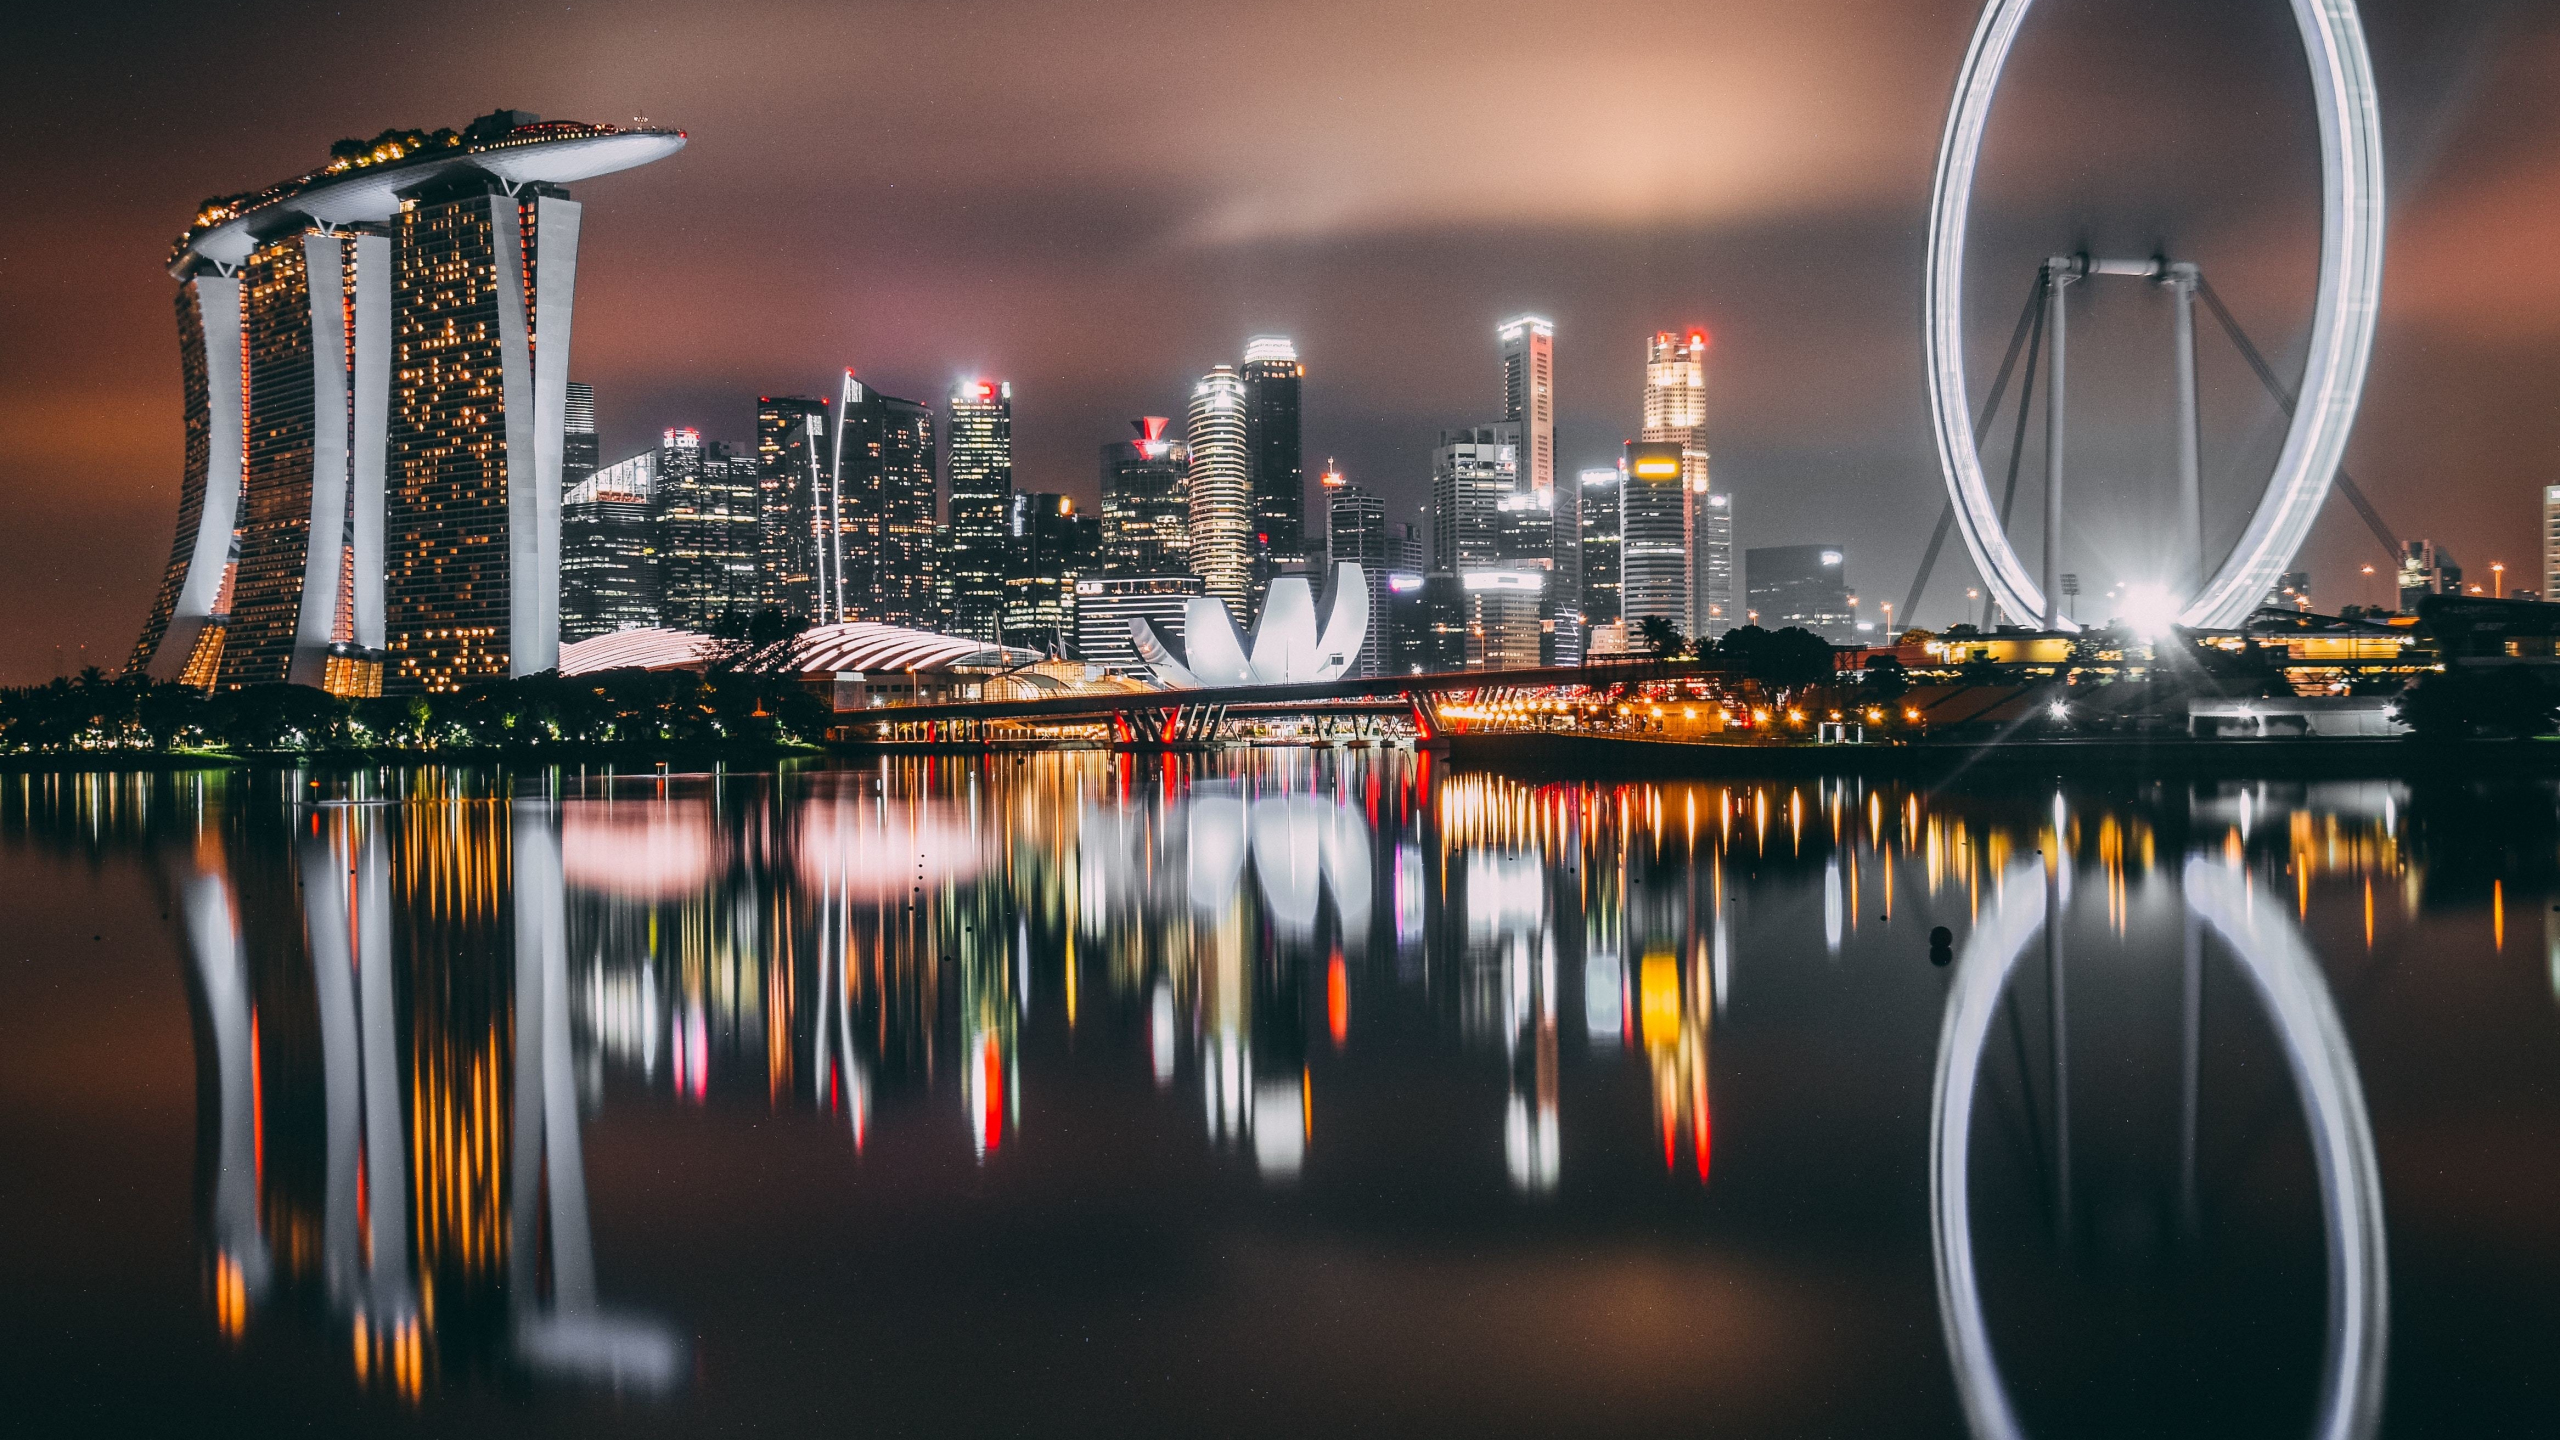 Download wallpaper 2560x1440 singapore, city, skyscrapers, buildings,  night, city, lights, reflections, dual wide 16:9 2560x1440 hd background,  2051